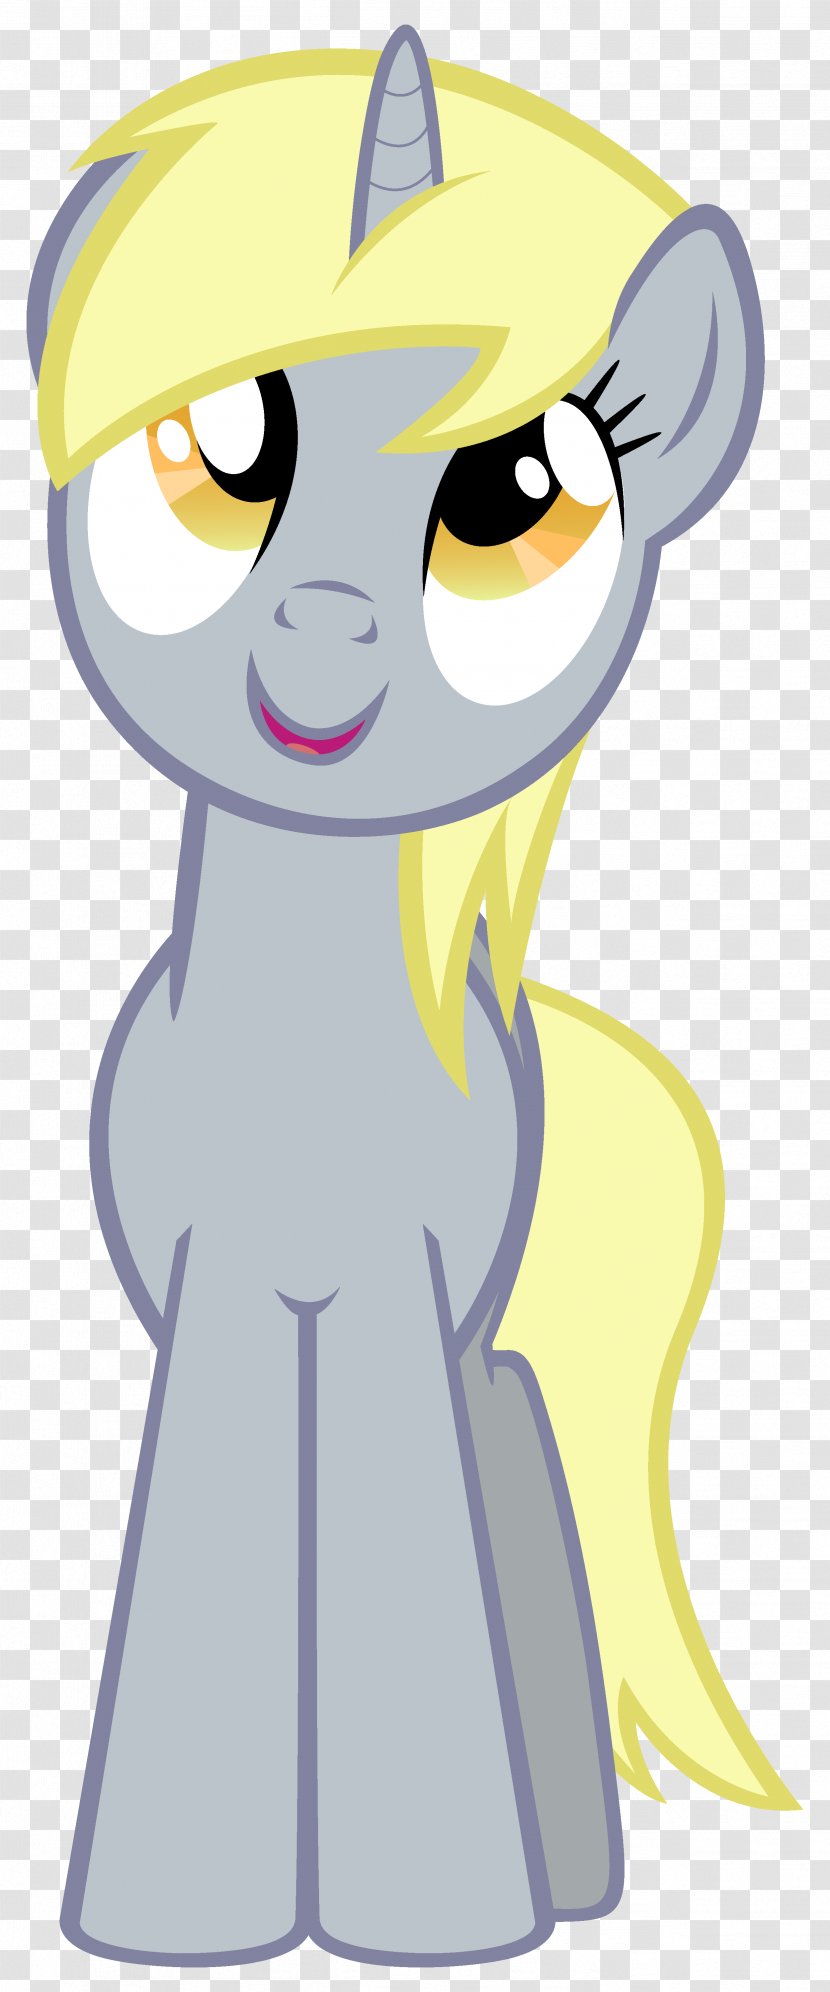 Derpy Hooves Unicorn Whiskers Pony - Frame - Ears Transparent PNG